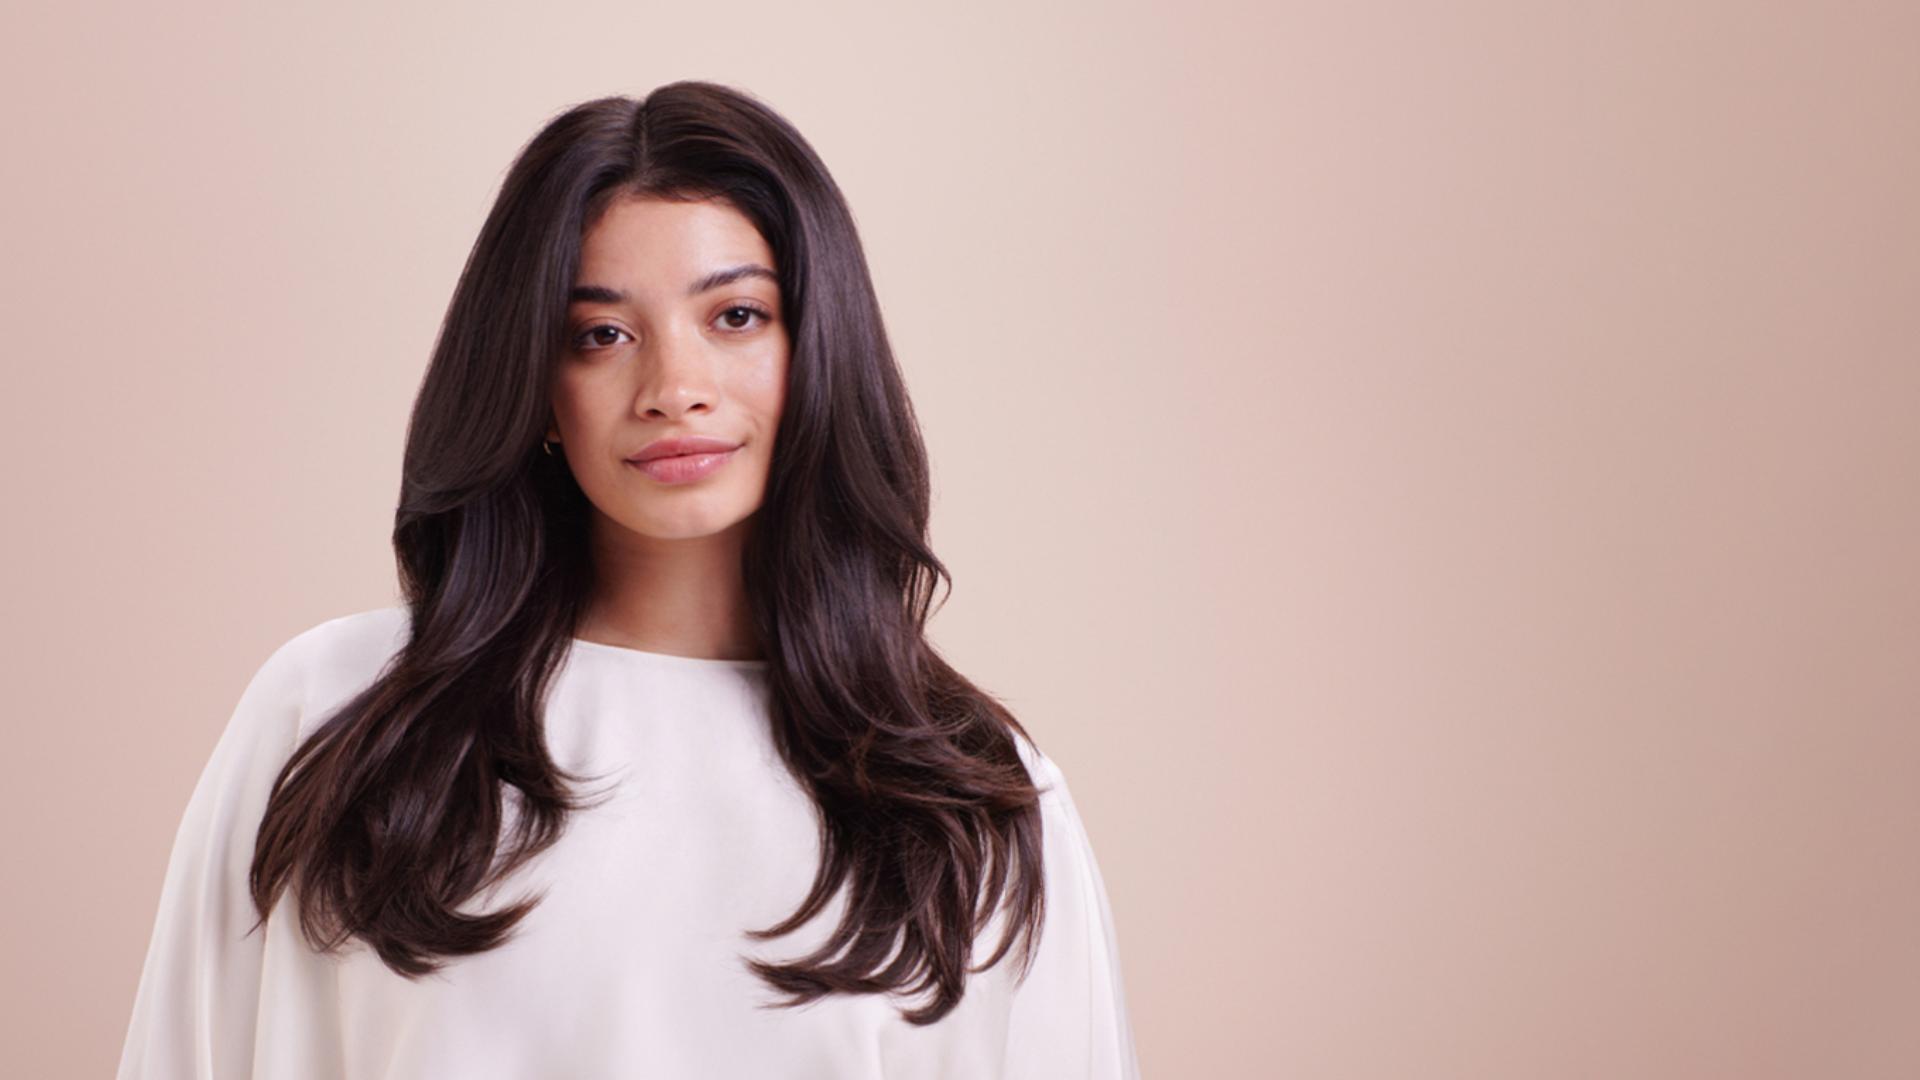 A model with styled blow-dried waves.